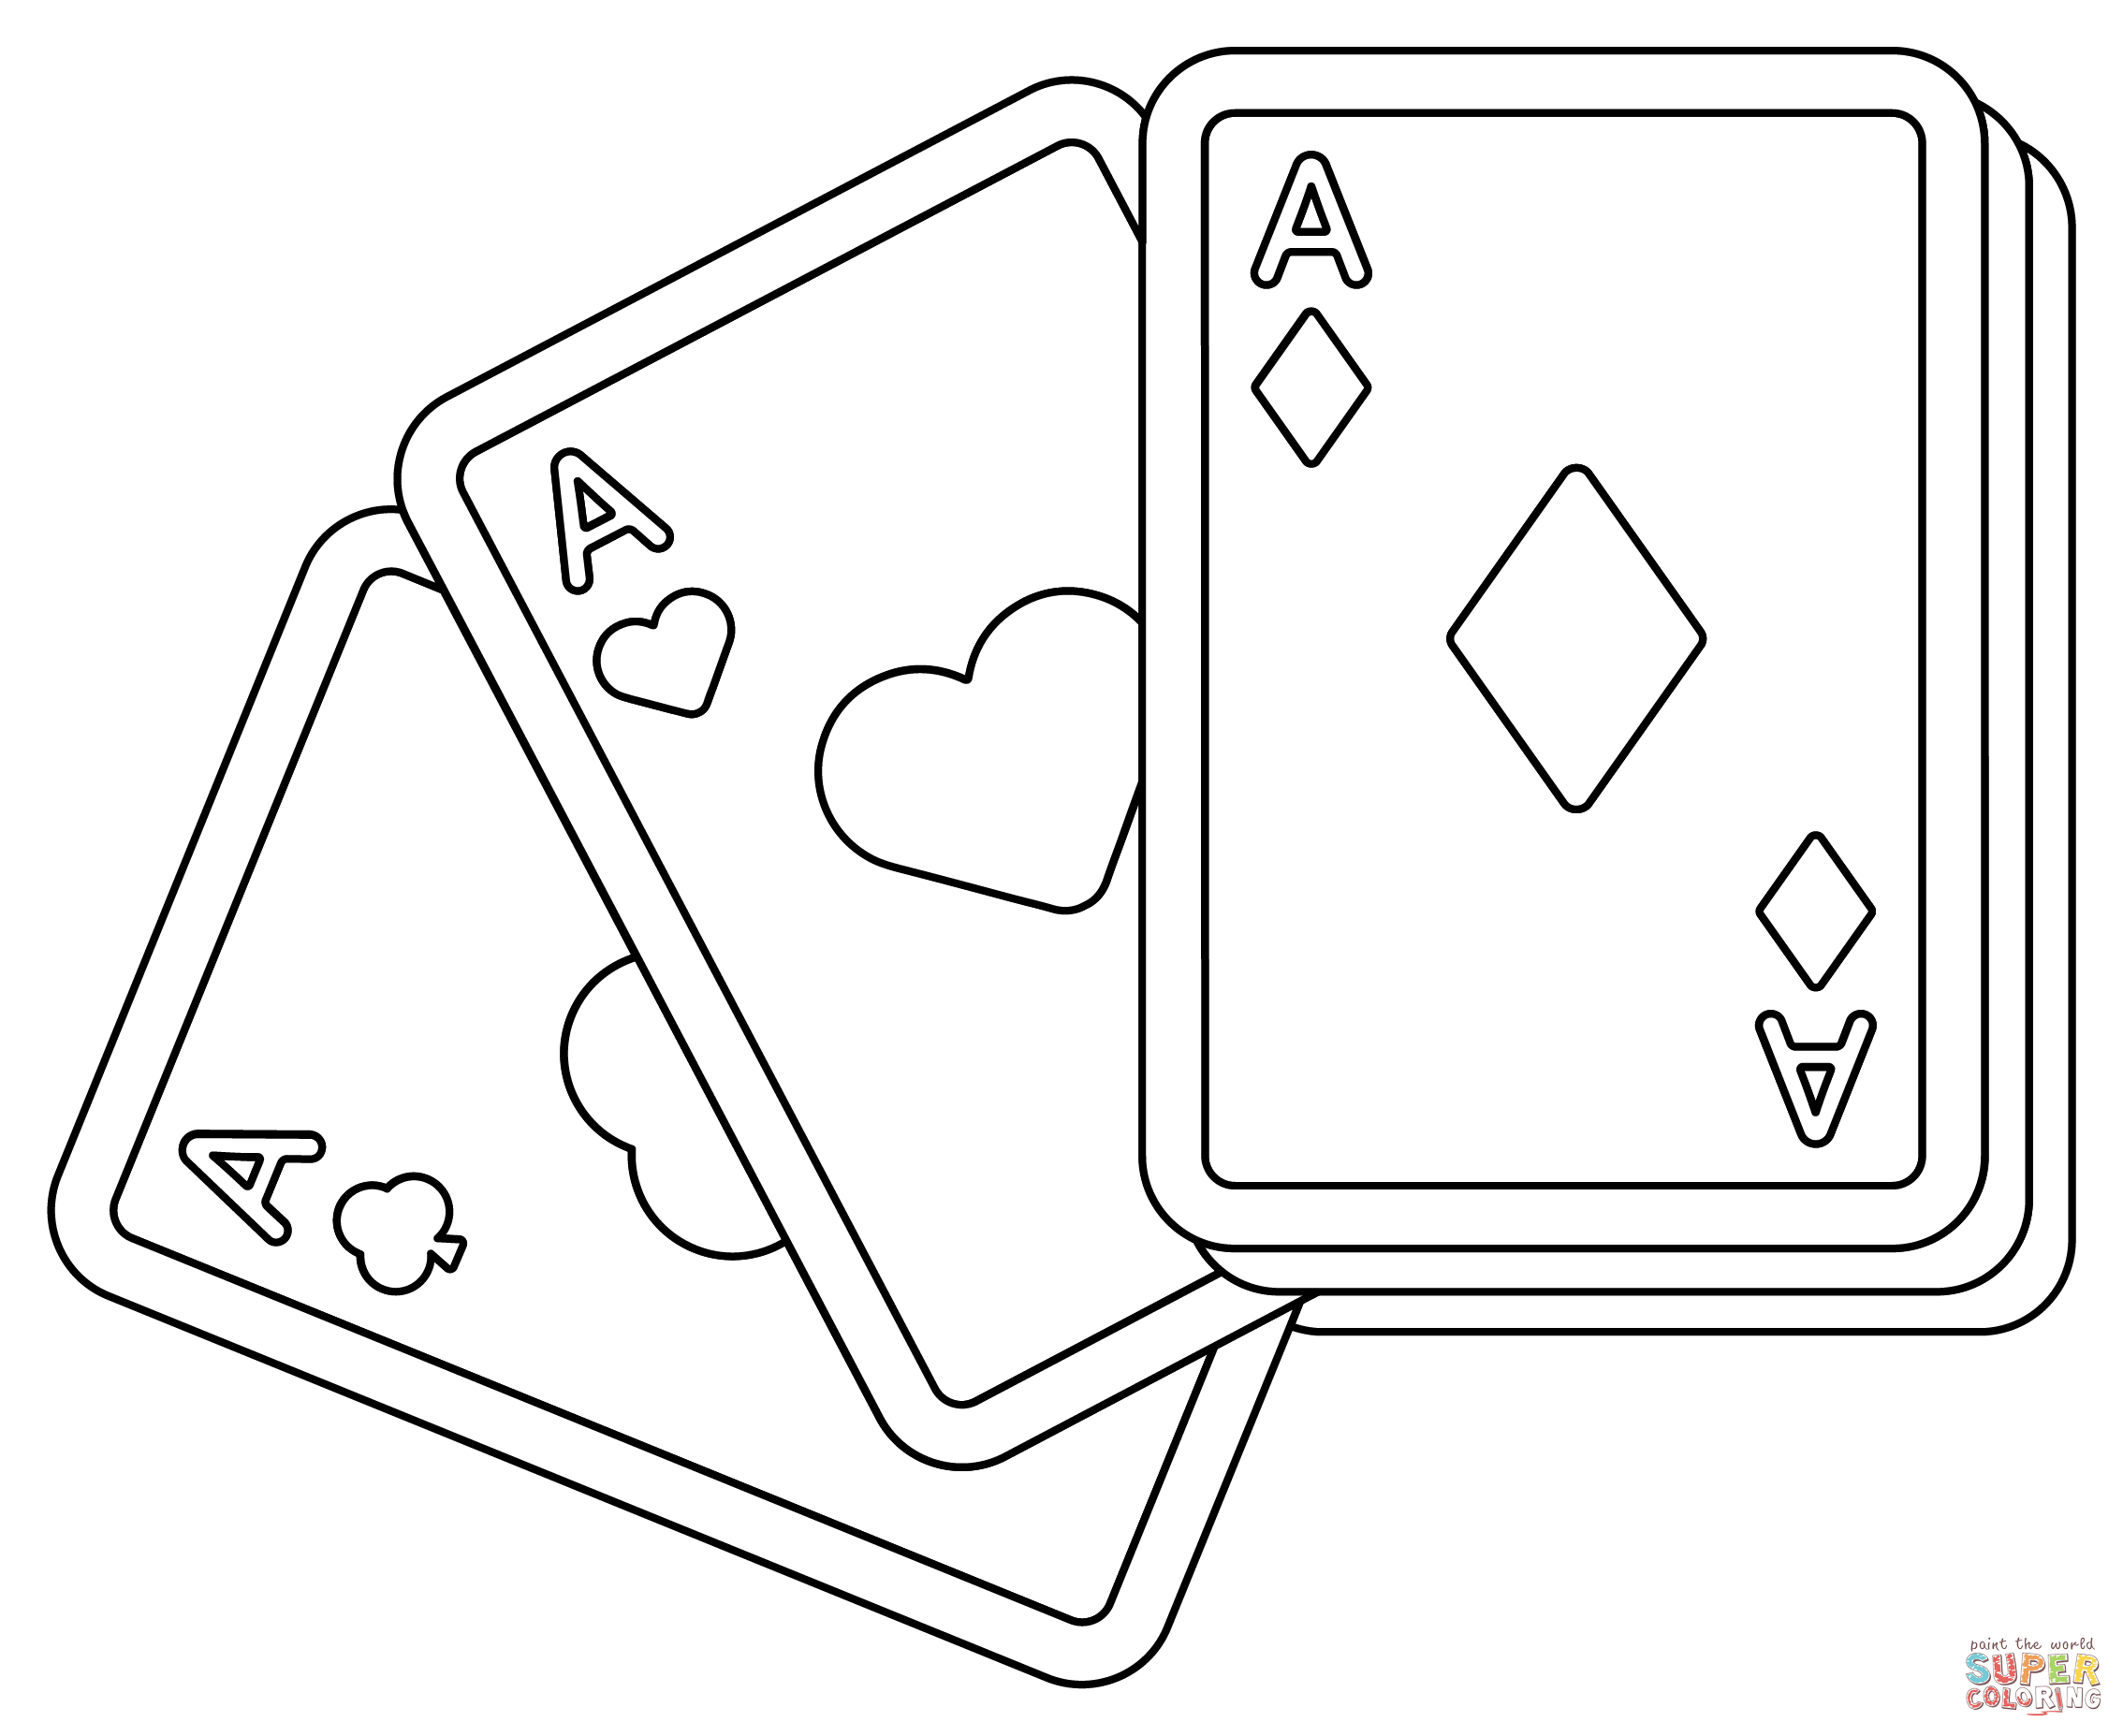 Deck of cards coloring page free printable coloring pages